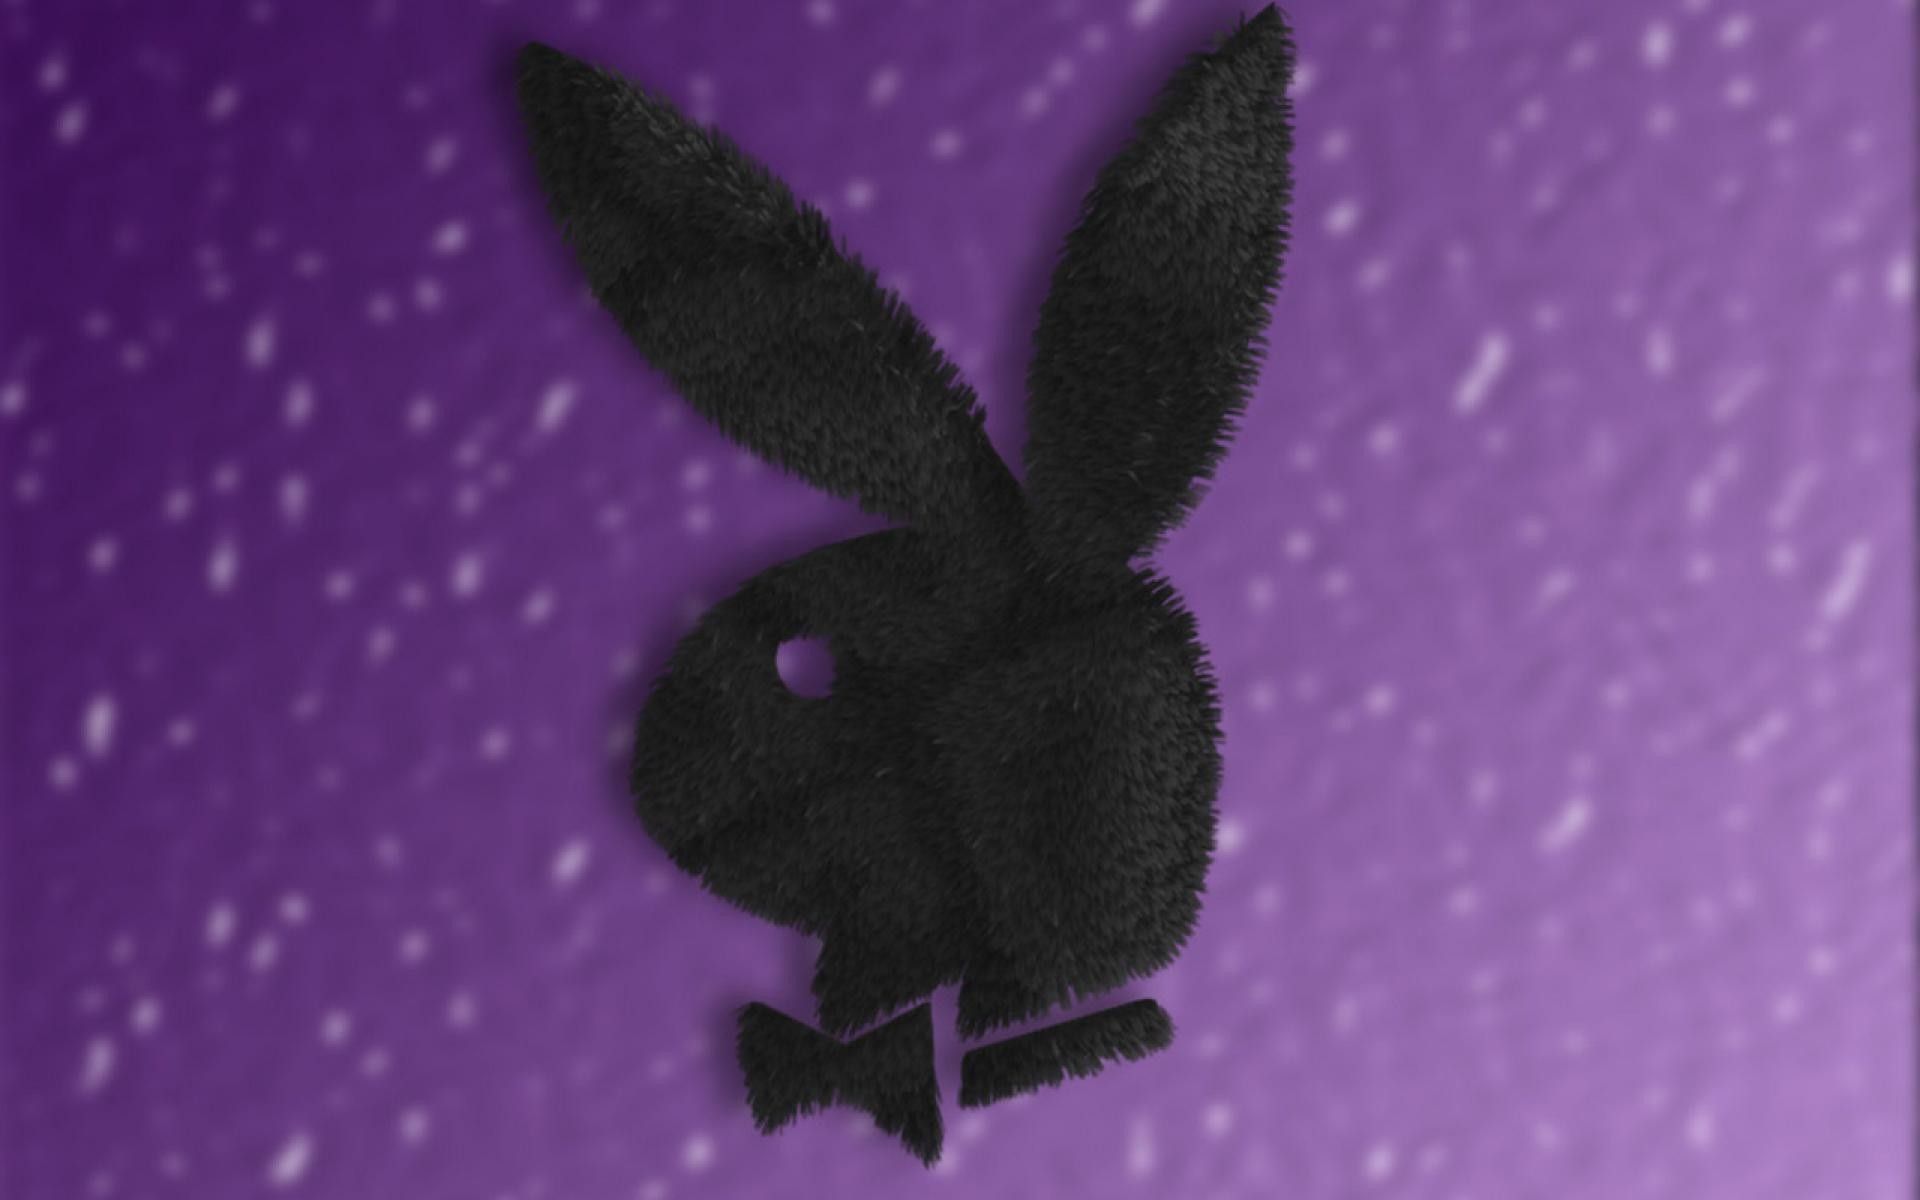 Playboy Logo Aesthetic Wallpapers - Wallpaper Cave